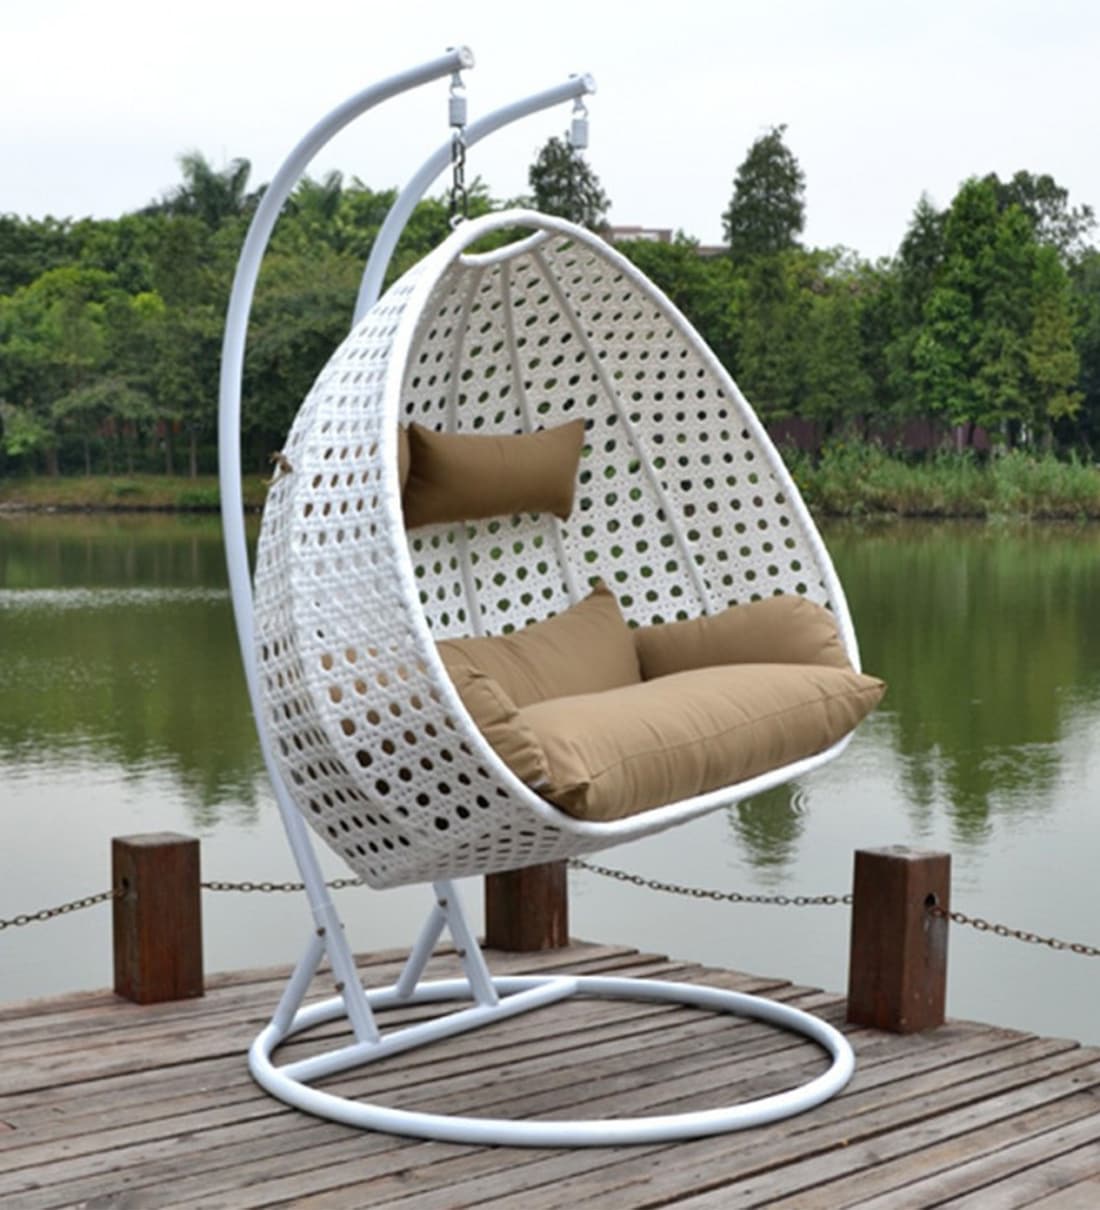 Dreamline Outdoor Furniture Double Seater Hanging Swing With Stand For Balcony , Garden Swing (White)